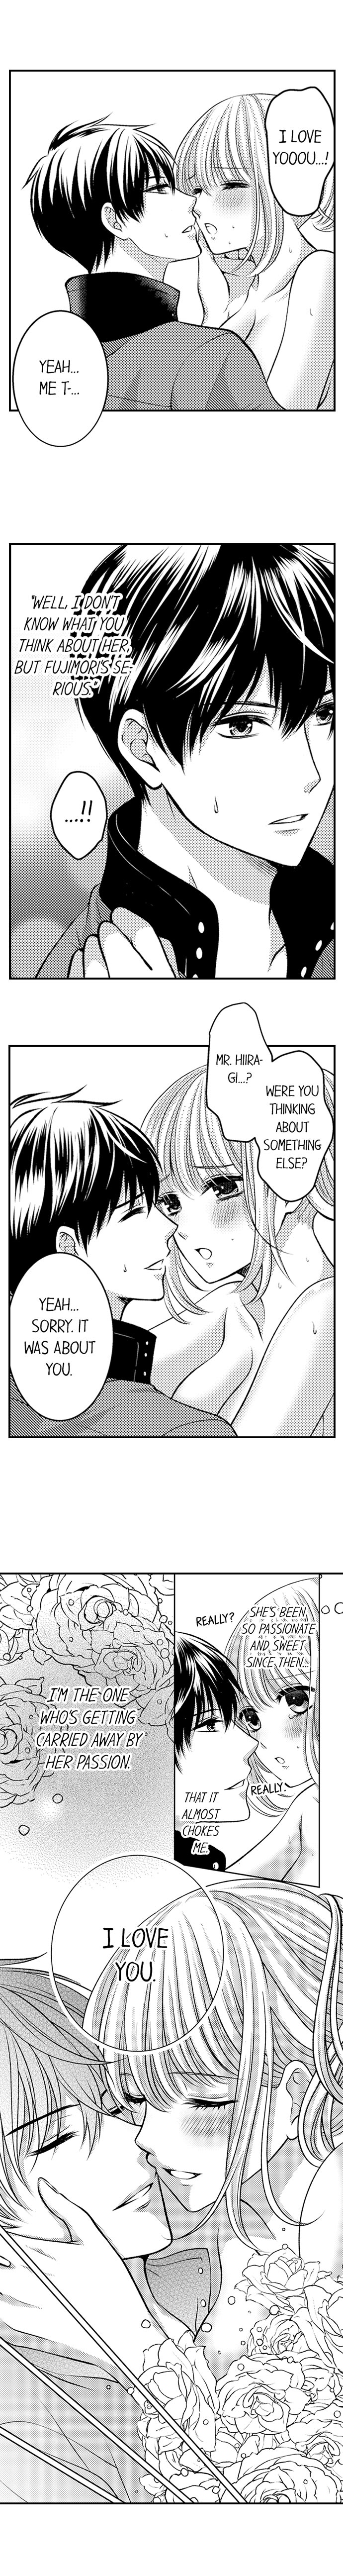 He Took My Adult Toy - "I'll Teach You How to Use It" Ch.63